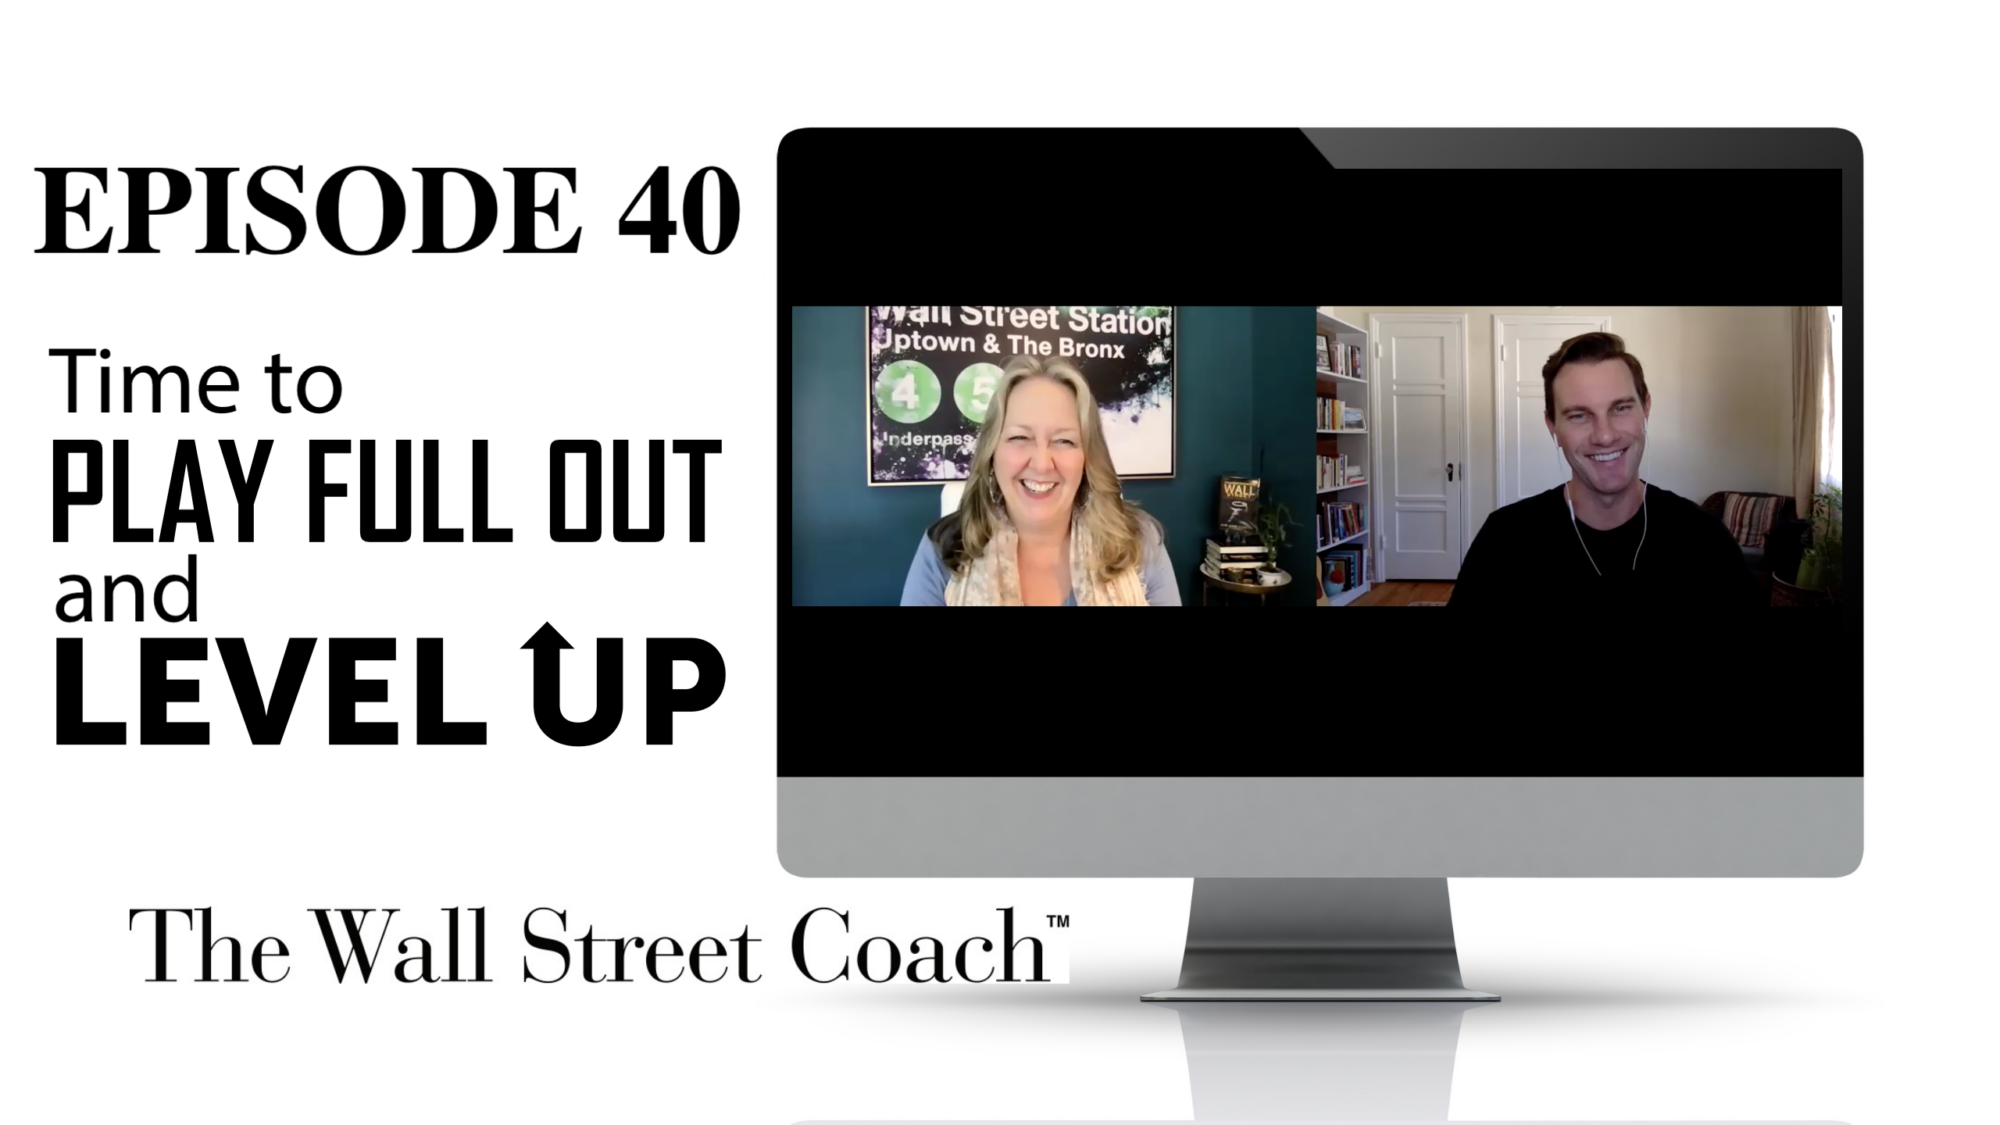 Episode 40: Time to Play Full Out and Level Up